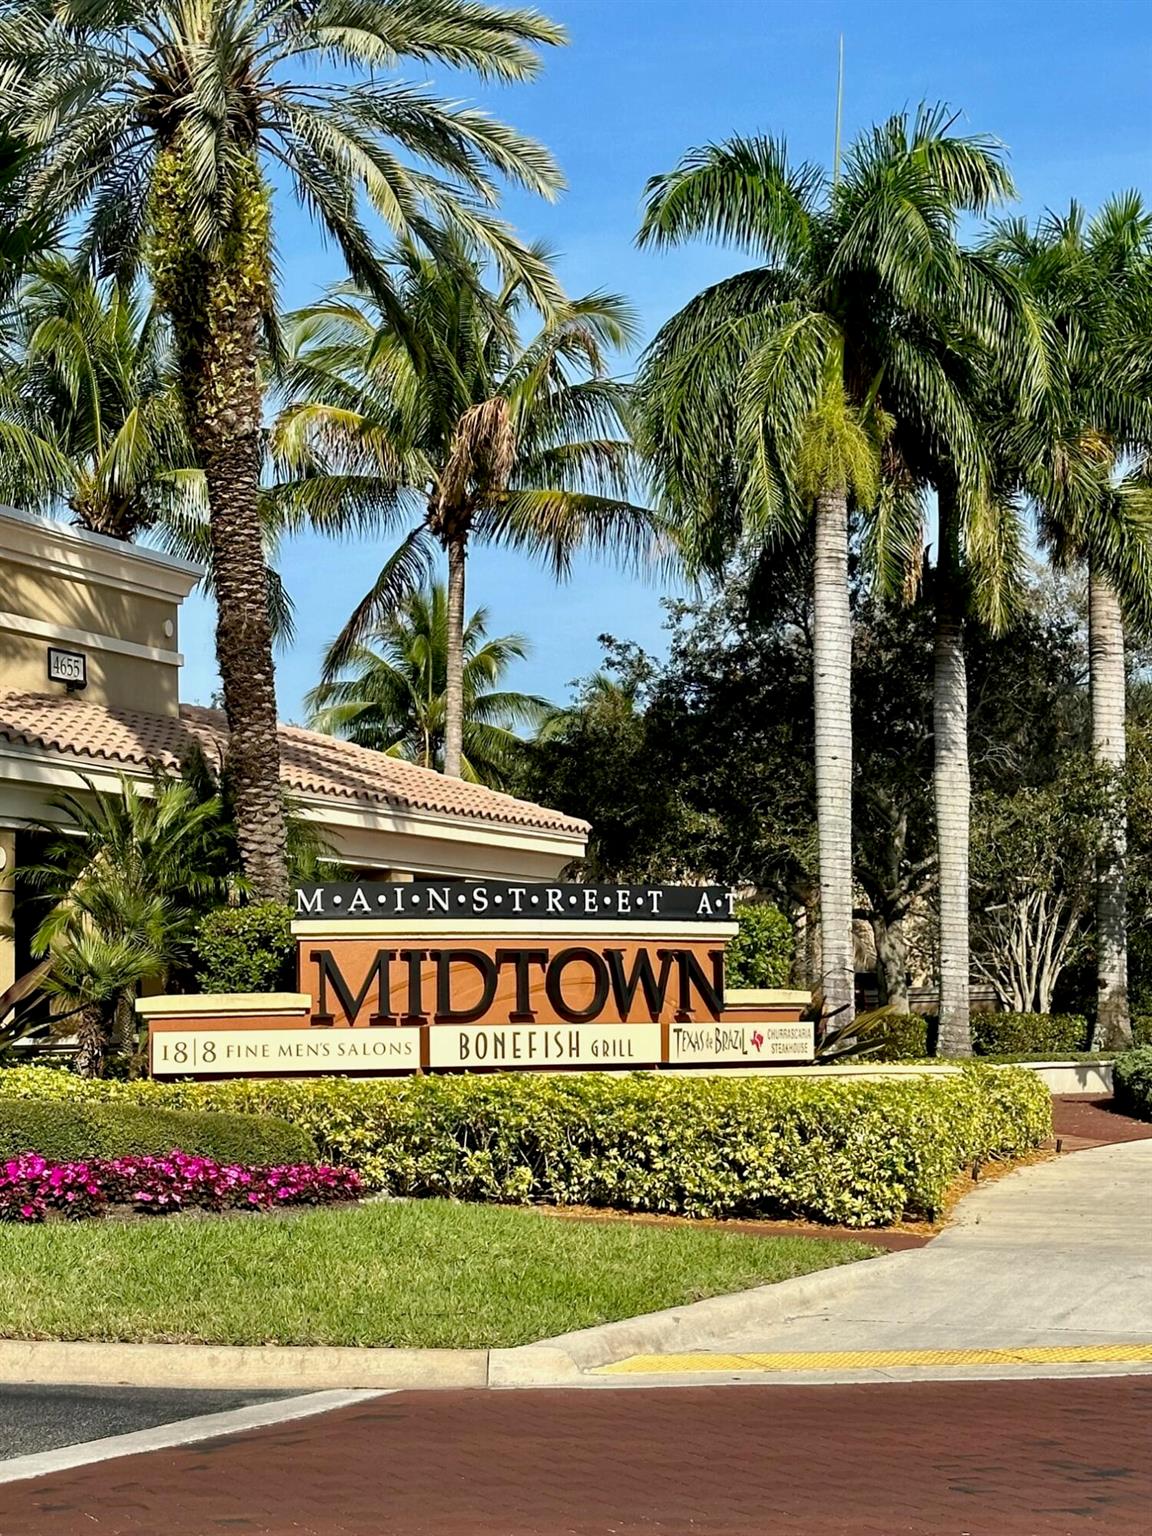 Like New Luxury Condo Located in the Heart of Palm Beach Gardens in Desirable Residences at Midtown. Convenient 2nd floor location in building closest to Clubhouse. Open kitchen with Stainless Steel Appliances, Granite Countertops, Microwave Replaced in 2019, Washer and Dryer Replaced in 2020, and much more. Condo features impact glass and private balcony with extra storage with view of lake from balcony. Enjoy Resort Style Living with Pool, Tennis Courts, Fitness Center, Business Center and Clubhouse. Centrally located near I-95, the Turnpike, walking distance to Shops, Publix, Fresh Market, Restaurants and Much More. Ready to move in! All taxes and measurements are approximate. Motivated Seller!